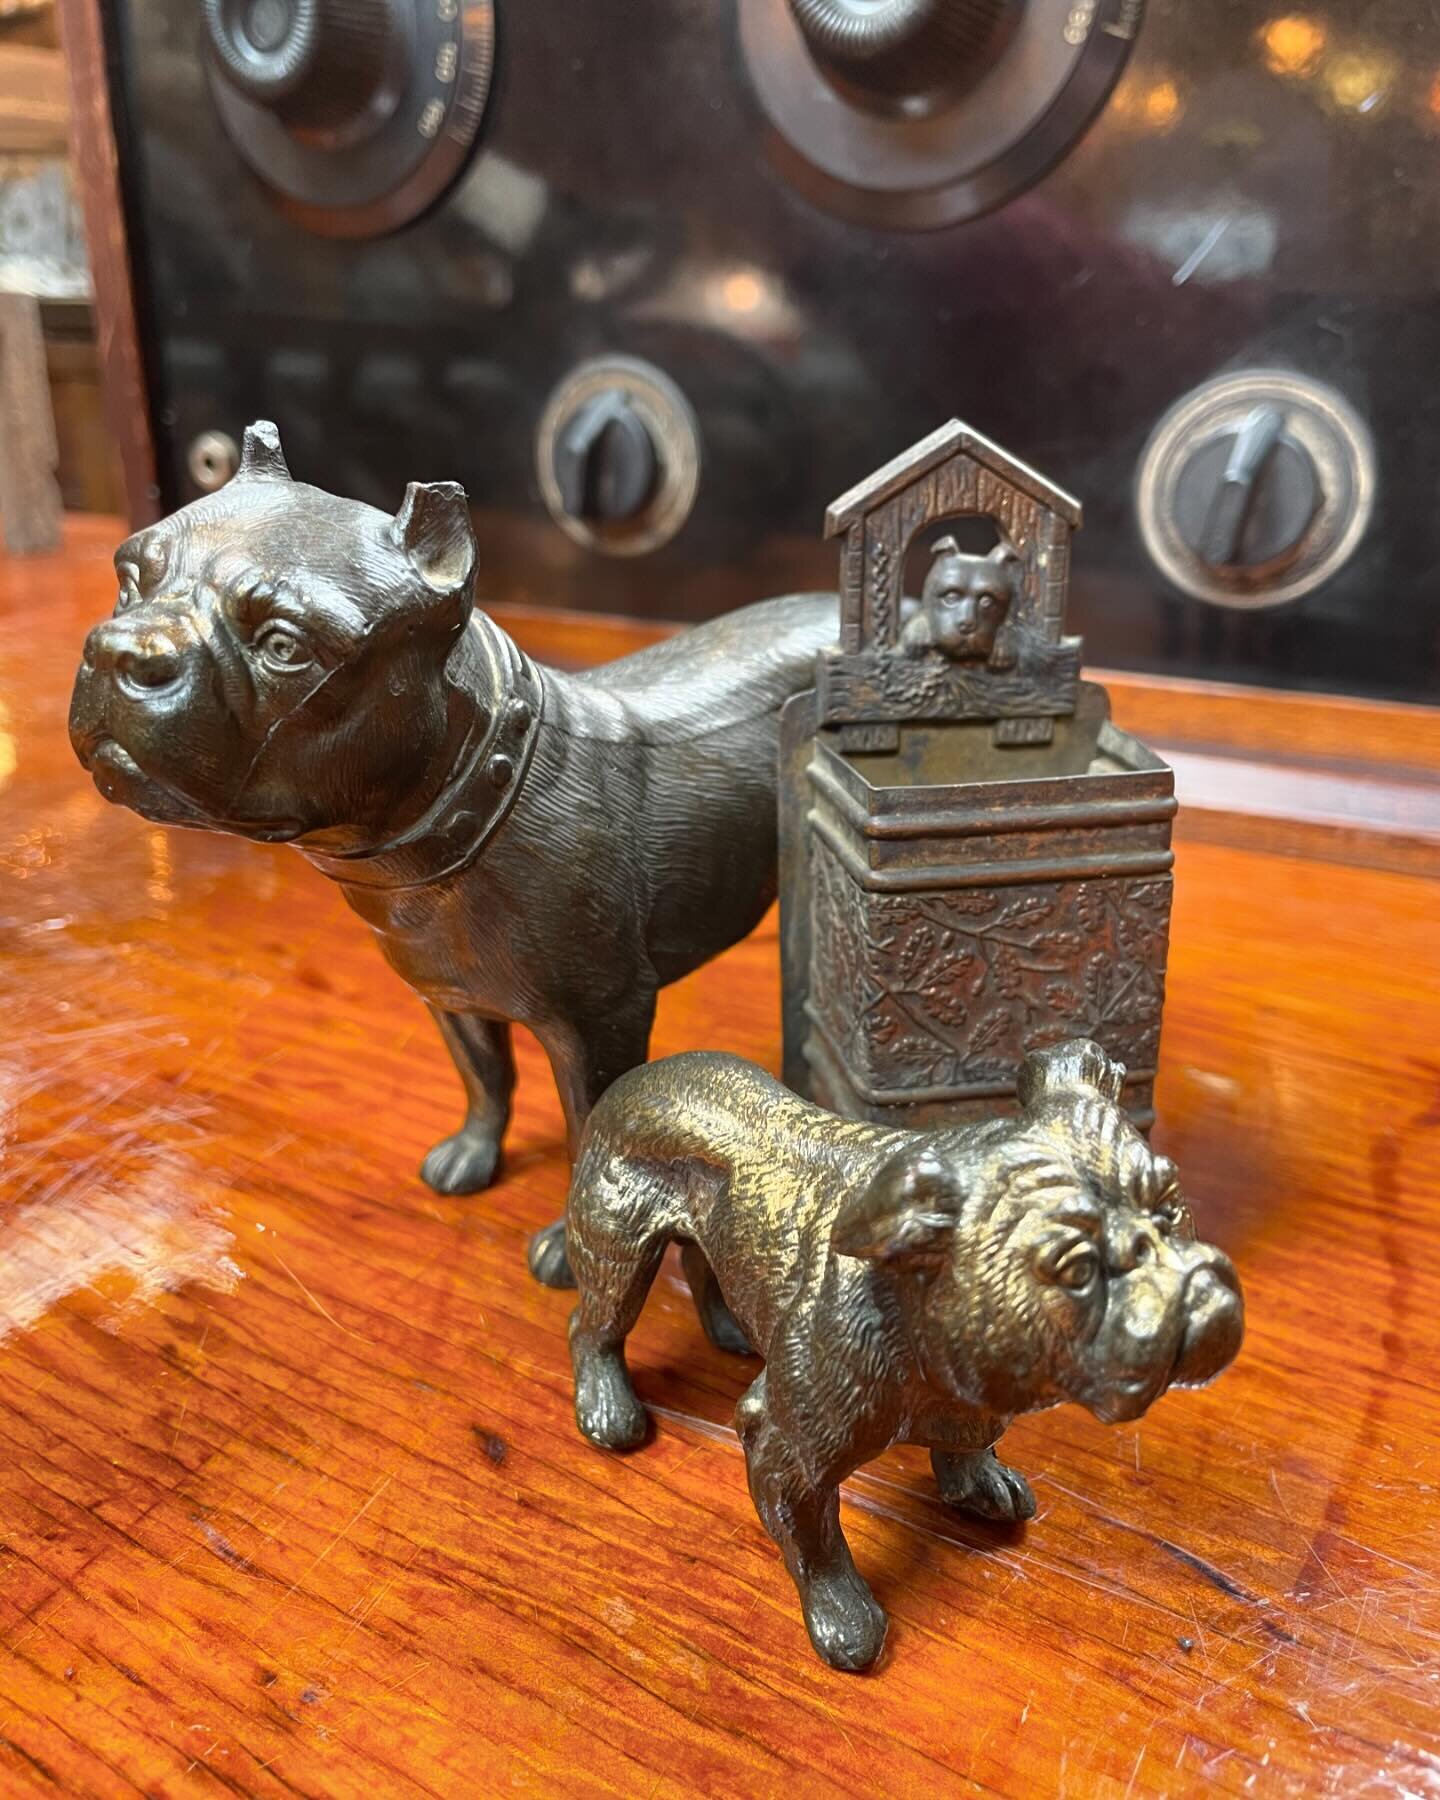 Sometimes it all about the little things!

This is fun sampling of some of the tinier treasures we acquired this past week!

#antiques #sellwoodmoreland #portland #pdx #oldportland #antiquefinds